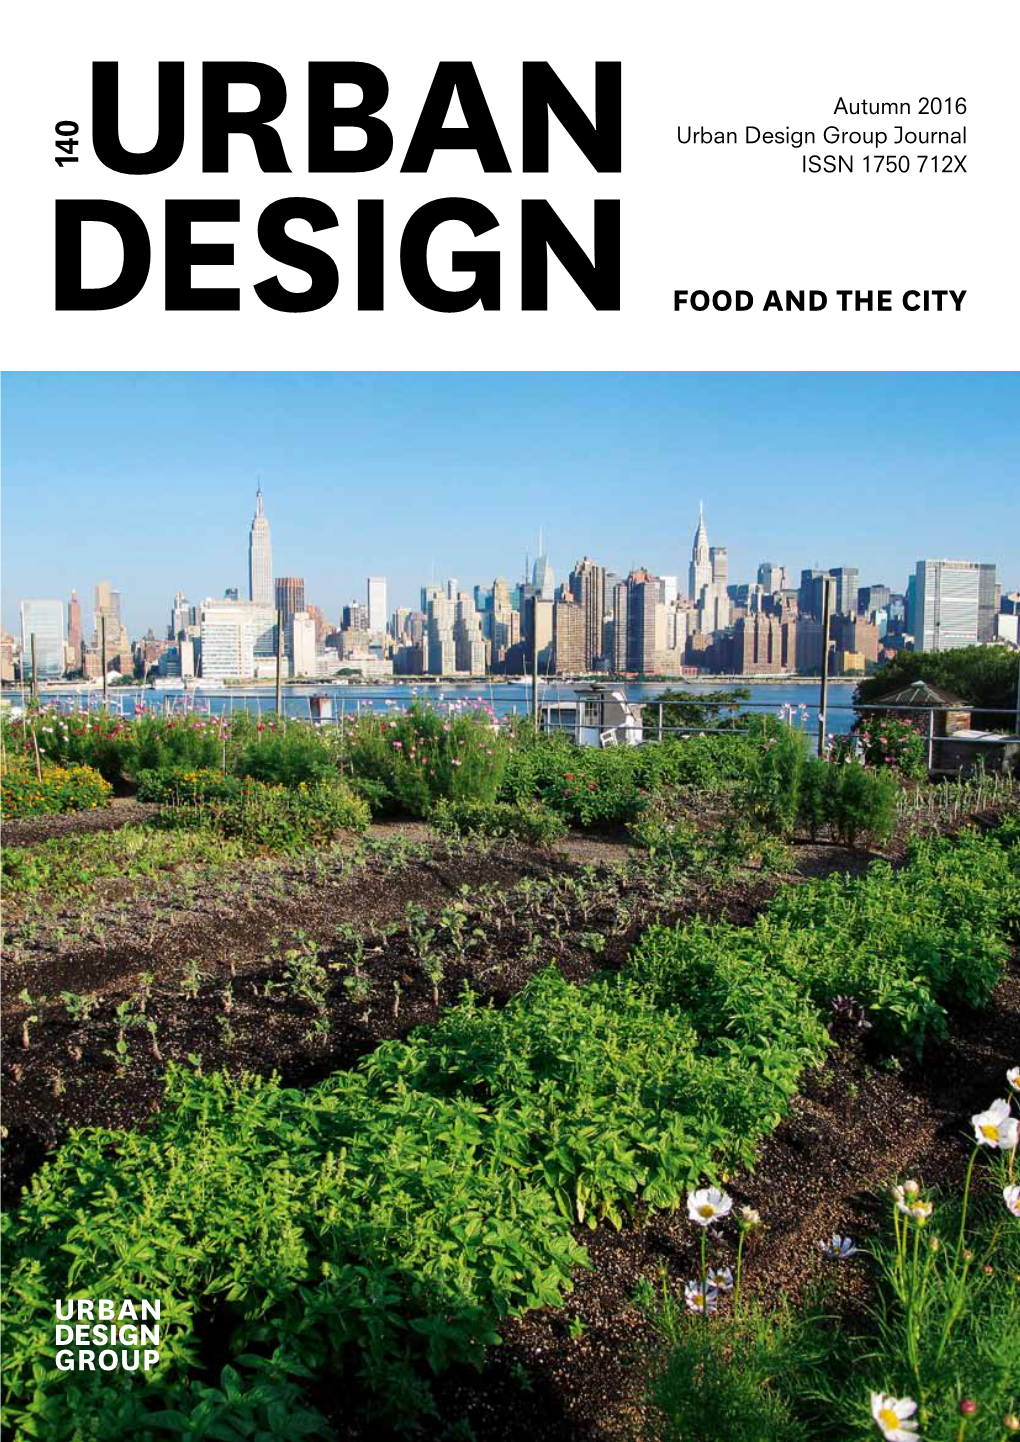 Food and the City URBAN DESIGN GROUP URBAN